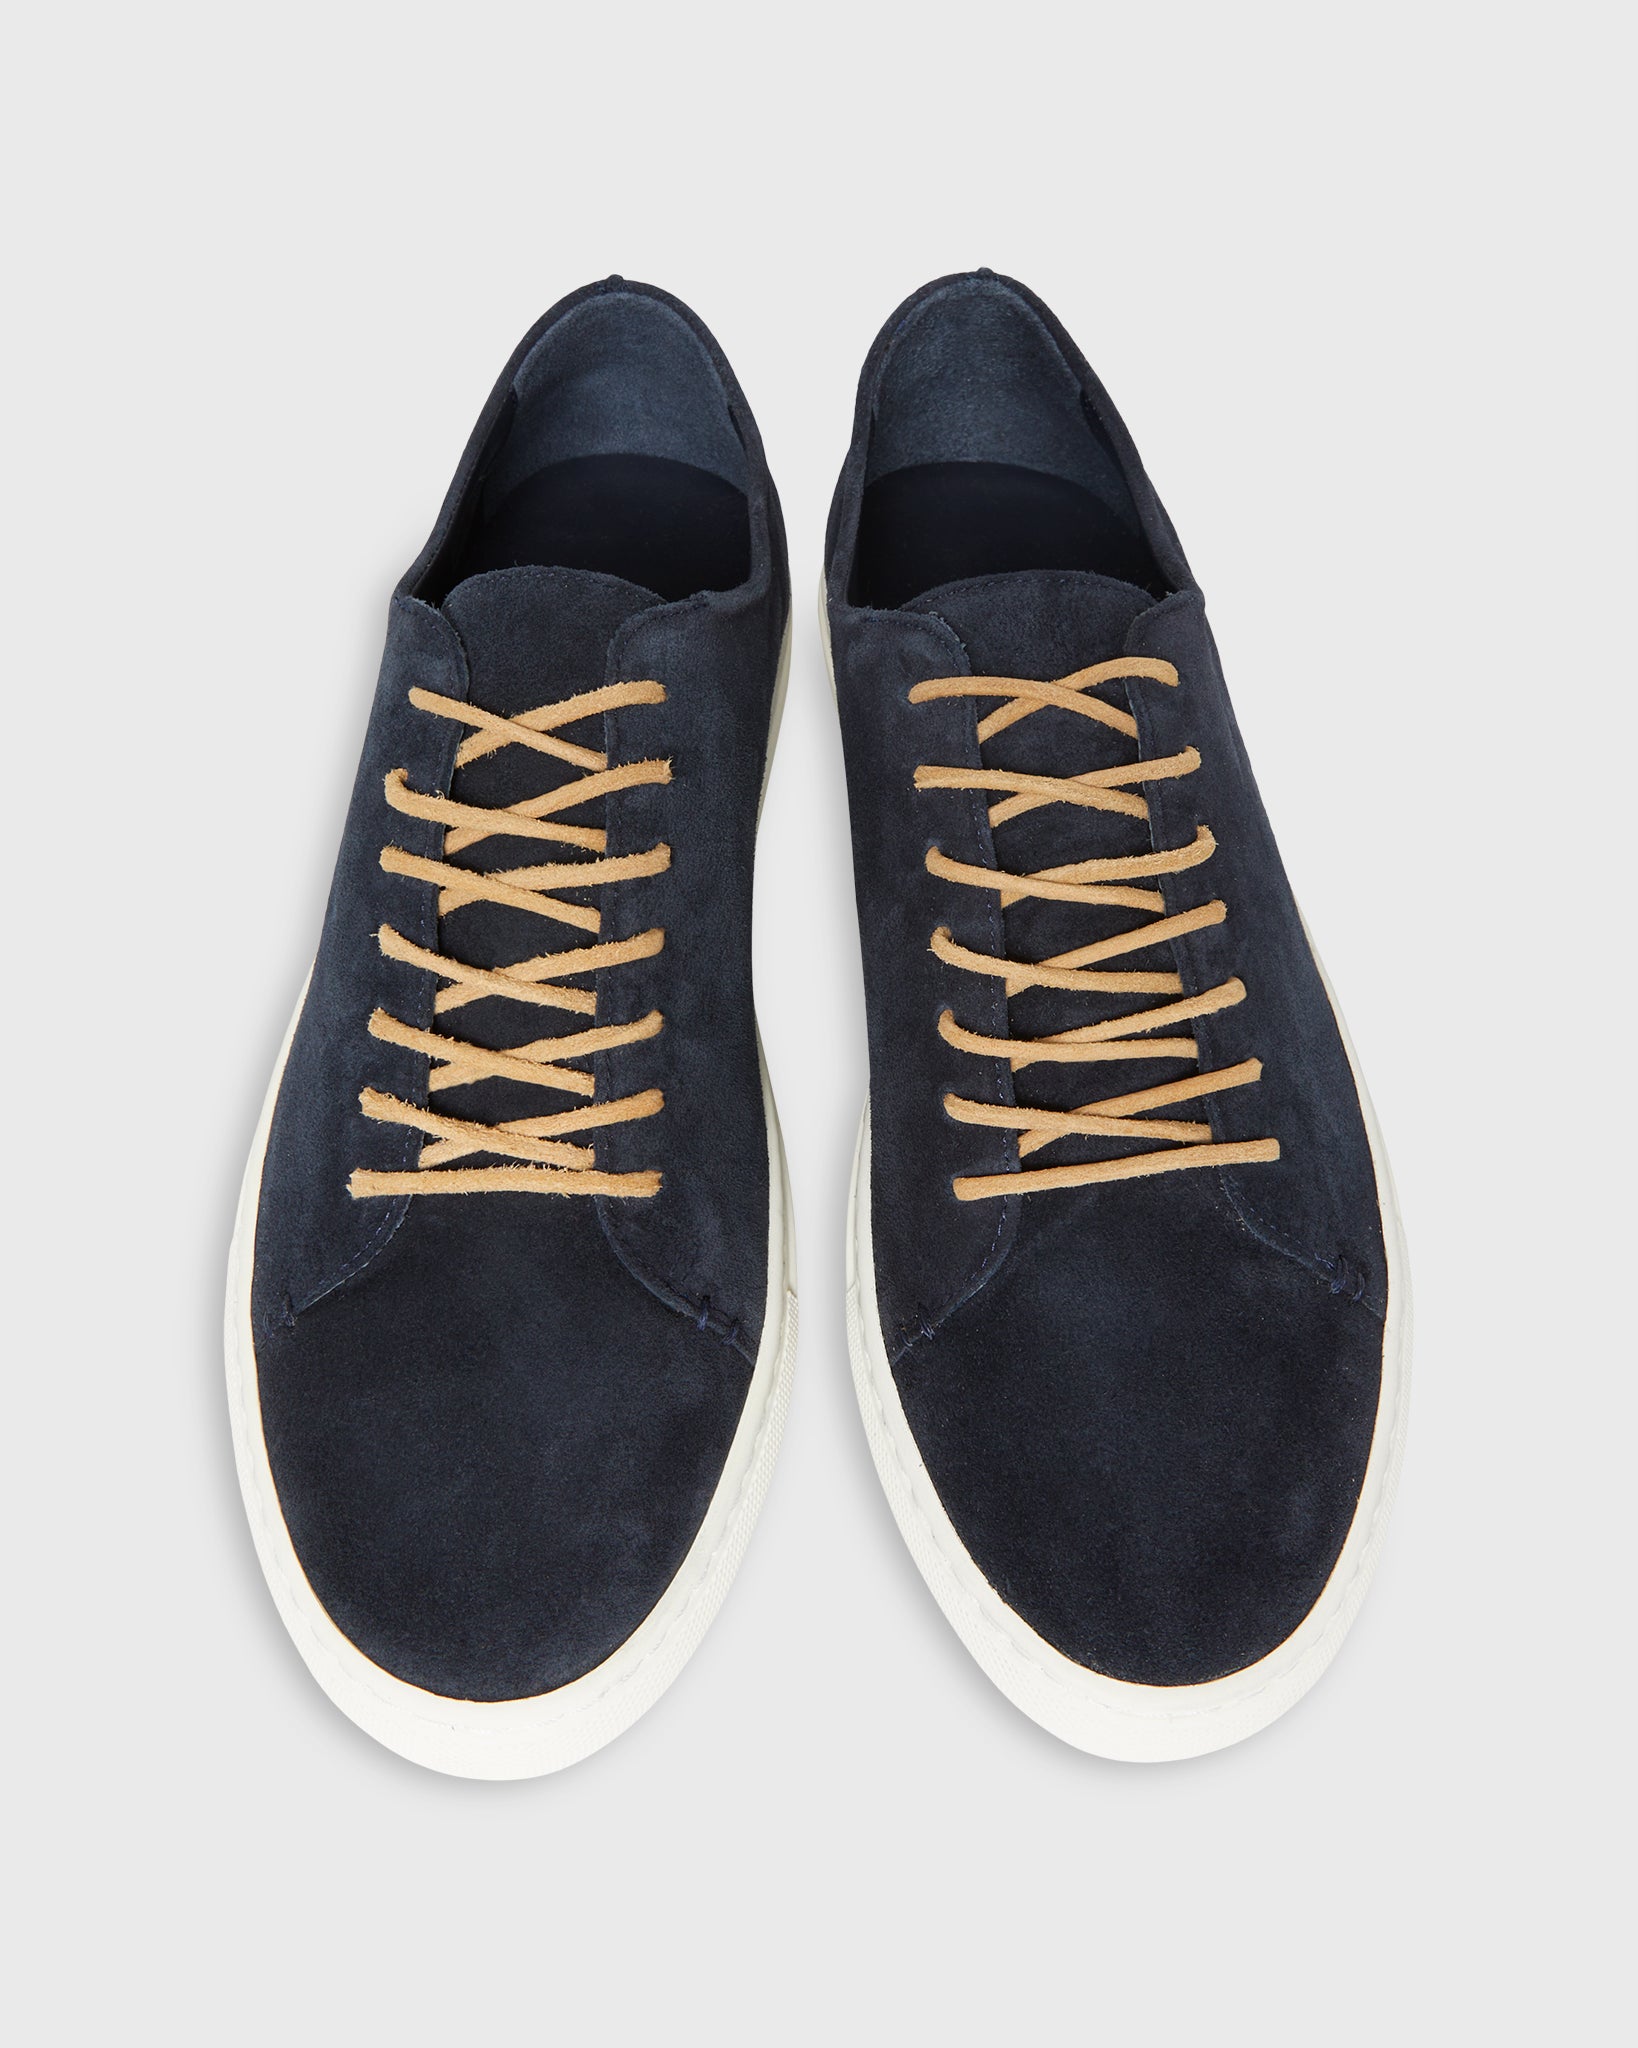 Low-Top Lace-Up Sneaker in Navy Suede